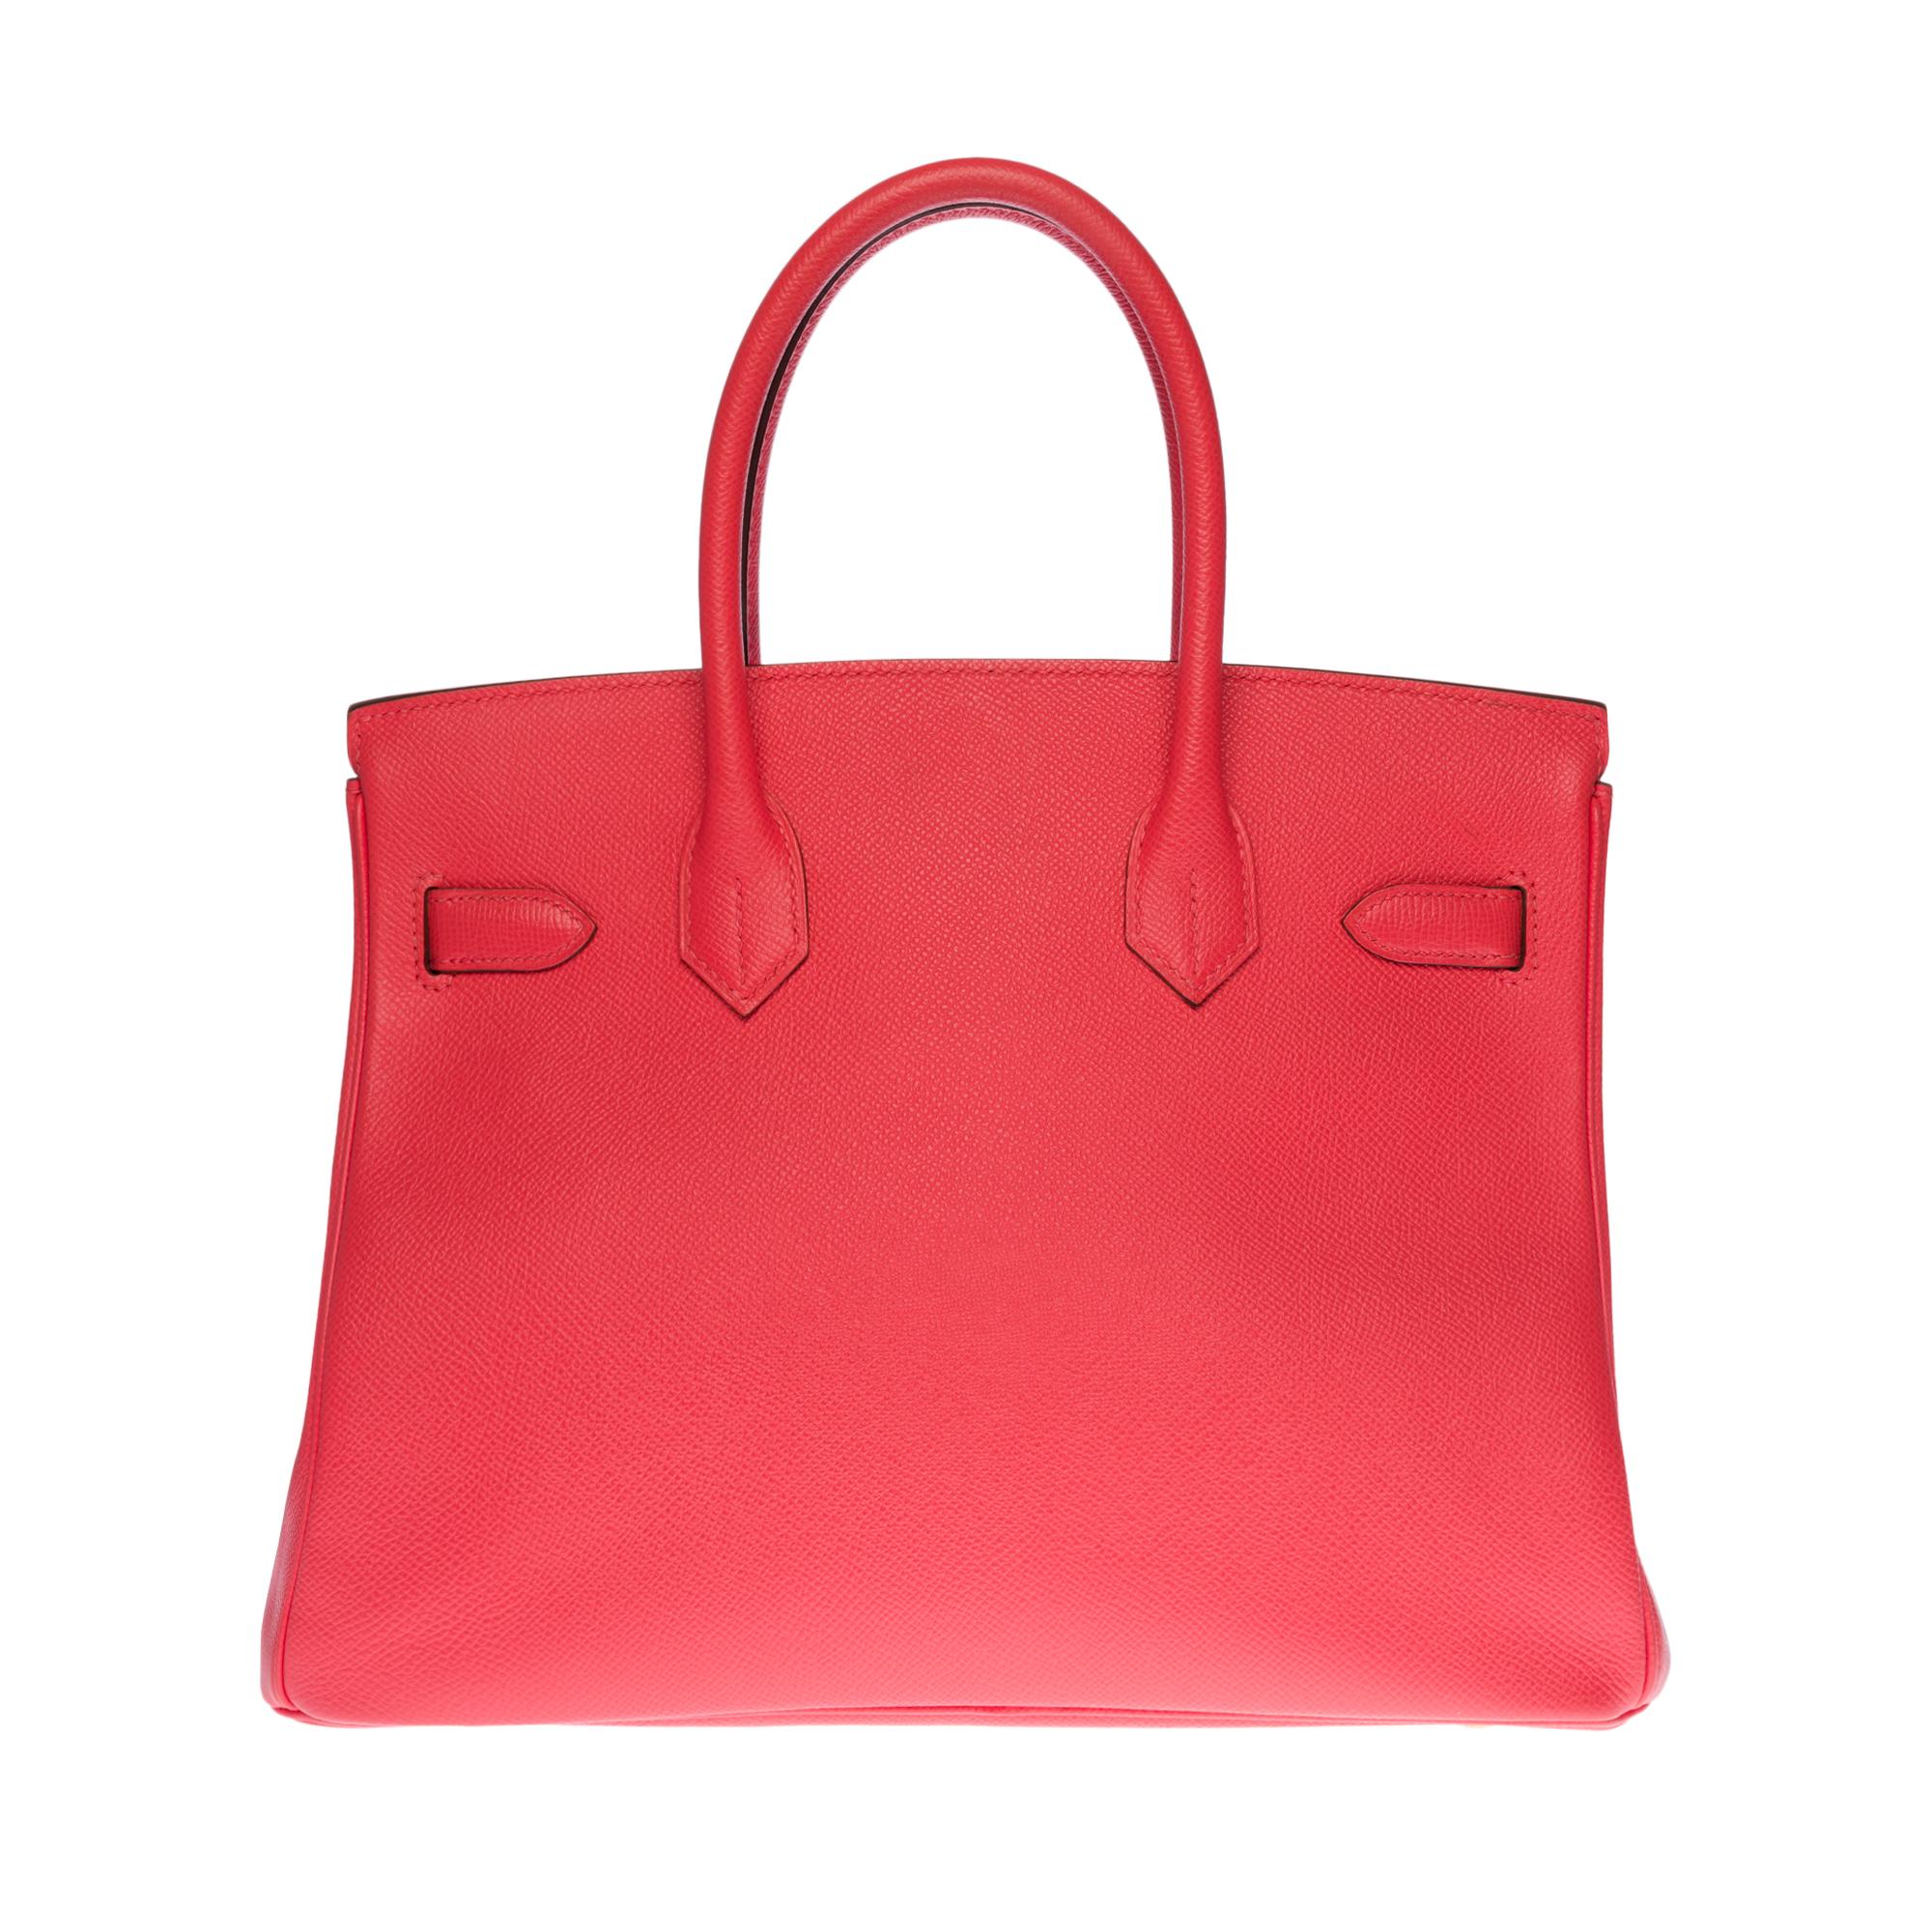 Gorgeous and highly sought-after Hermes Birkin 30 cm Epsom Rose Jaipur leather handbag with gold-plated metal hardware, double pink leather handle for a handheld.

Closure by flap.
Lining in pink leather, a zipped pocket, a patch pocket.
Signature: